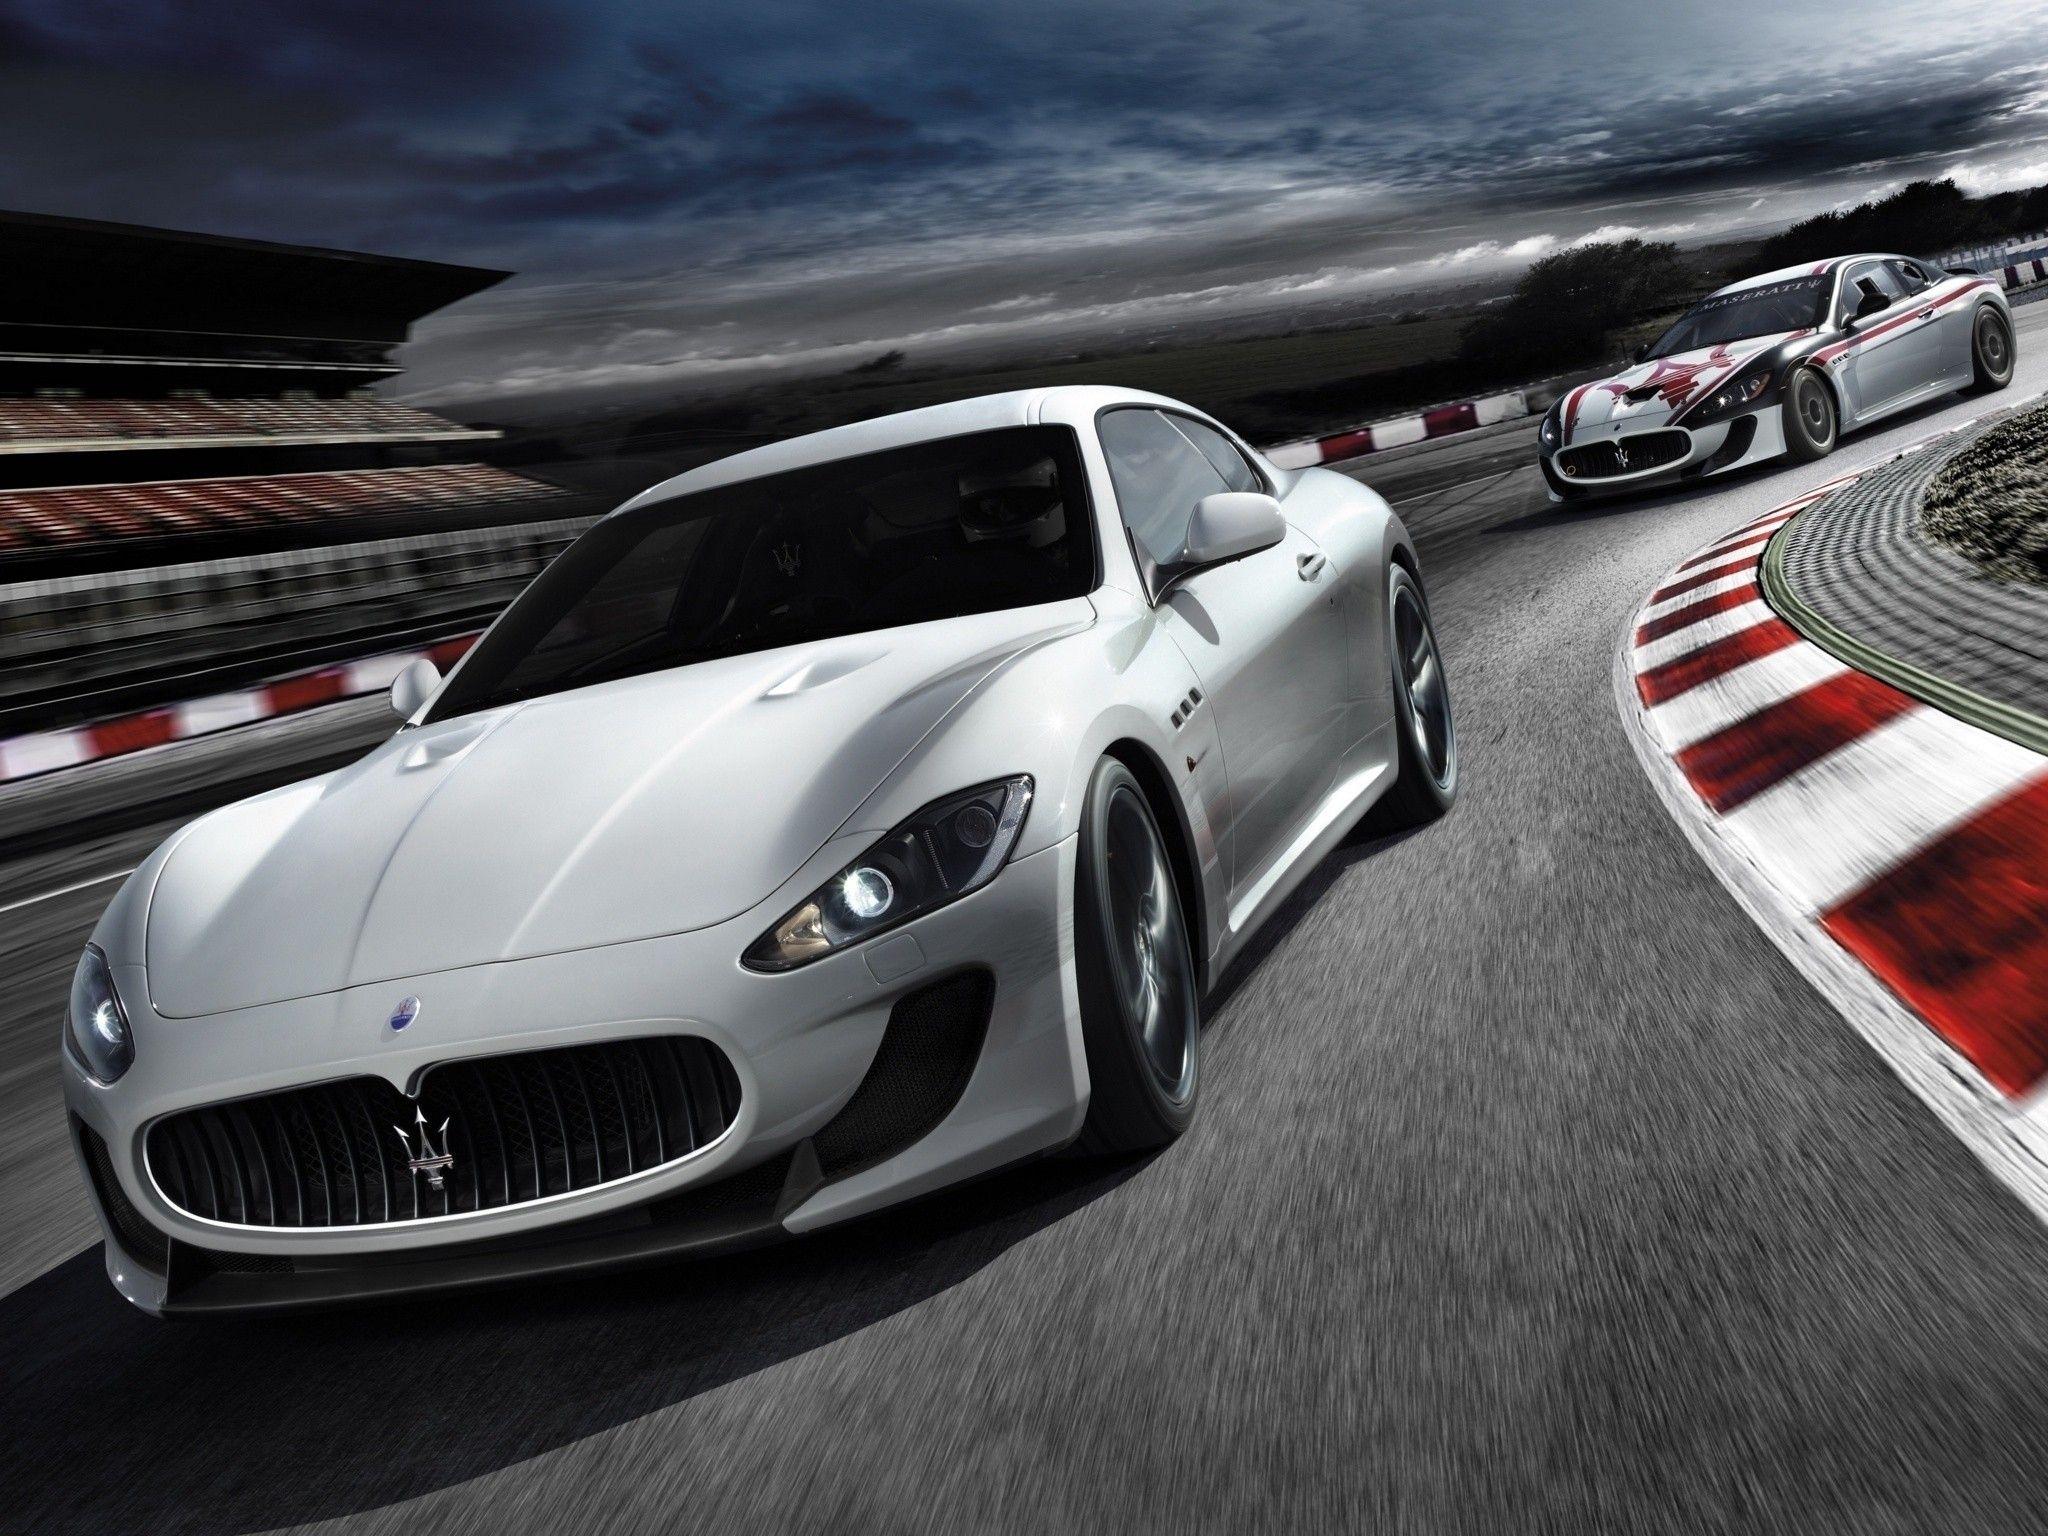 Maserati Car Hd Wallpapers Top Wallpapers Widescreen On For Laptop